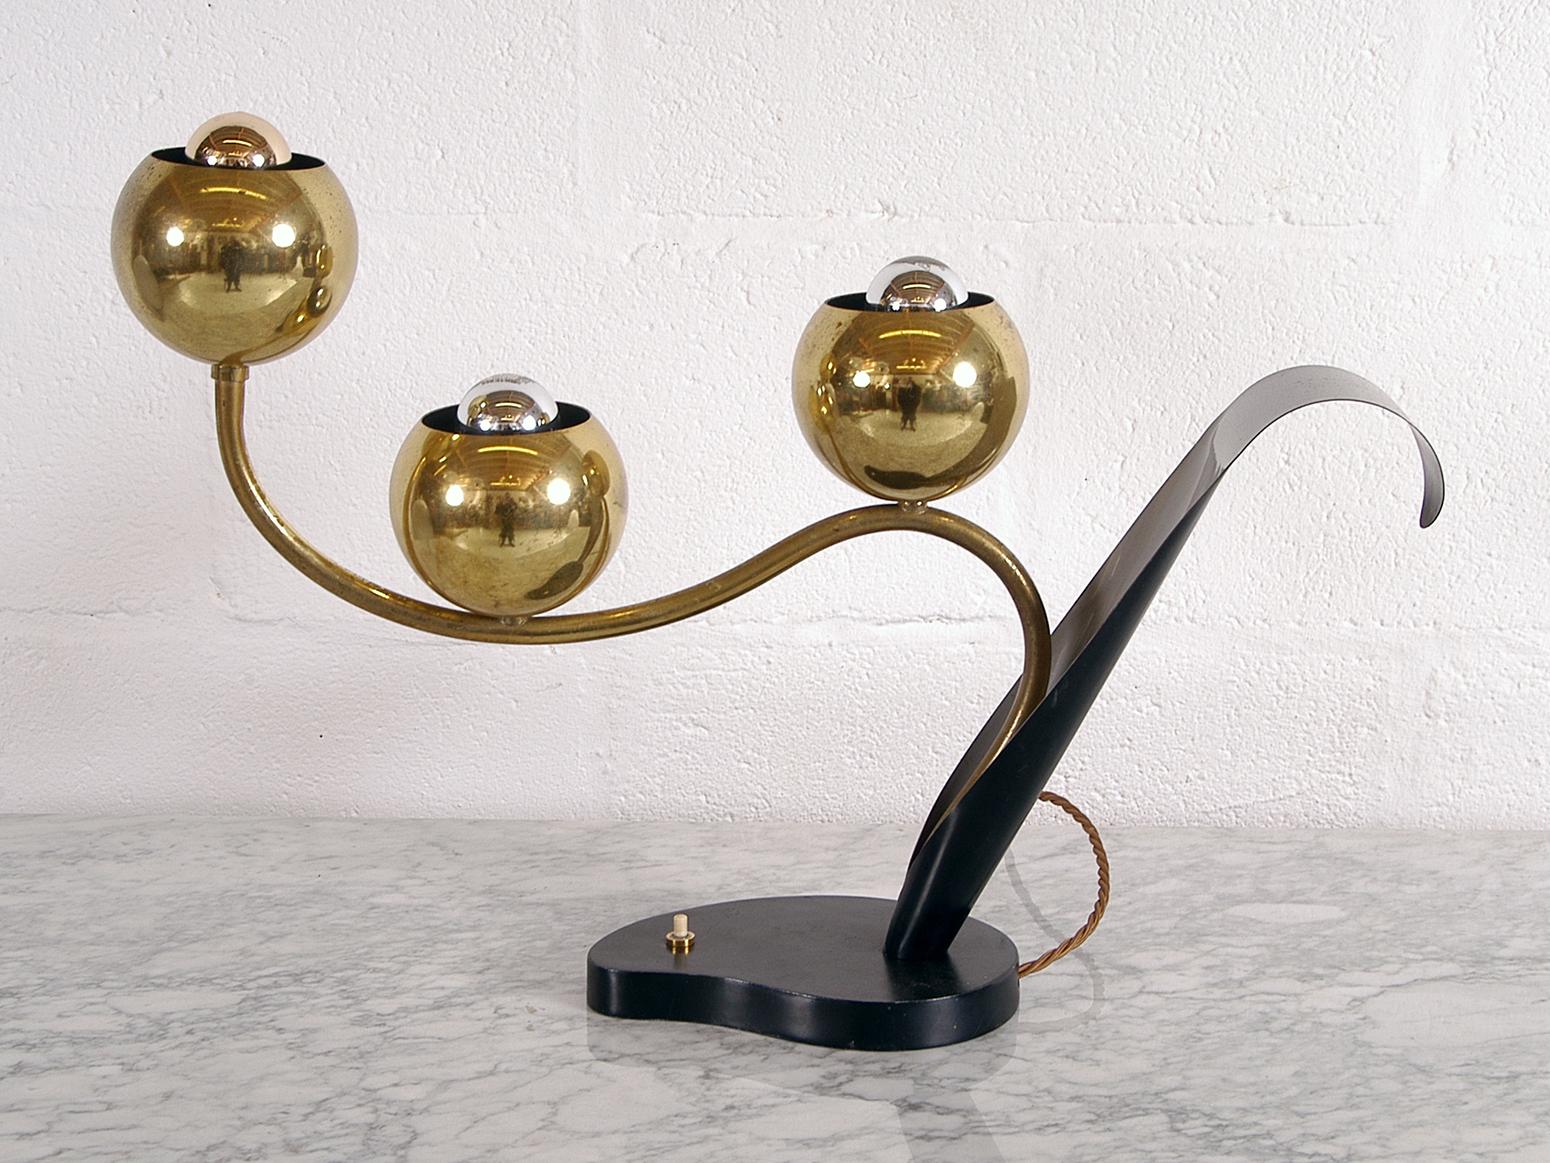 Pure 1950s stylish American Kitsch by The Laurel Lamp Company, USA, who were an active tastemaker in Mid-Century Modern lighting from the 1950s-1970s. This incredibly elegant lamp is in the form of a stylized flower, where three brass ball shades